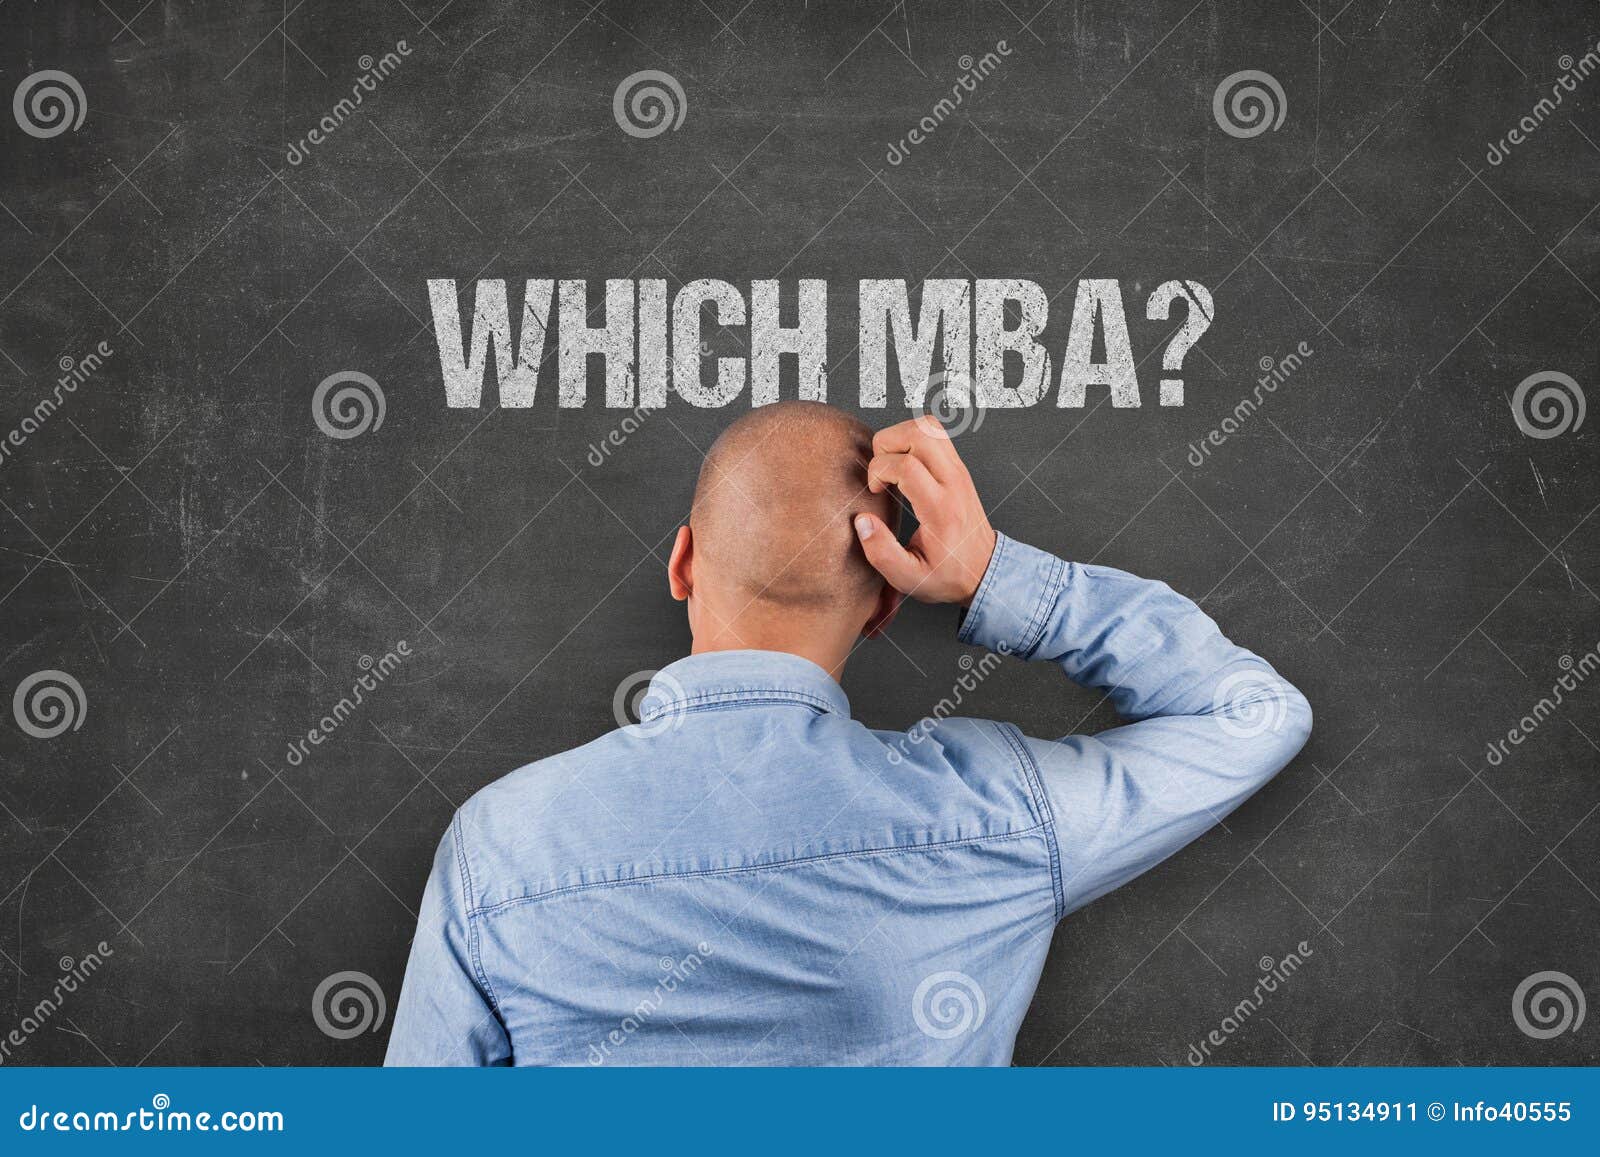 confused businessman scratching head under mba text on blackboard